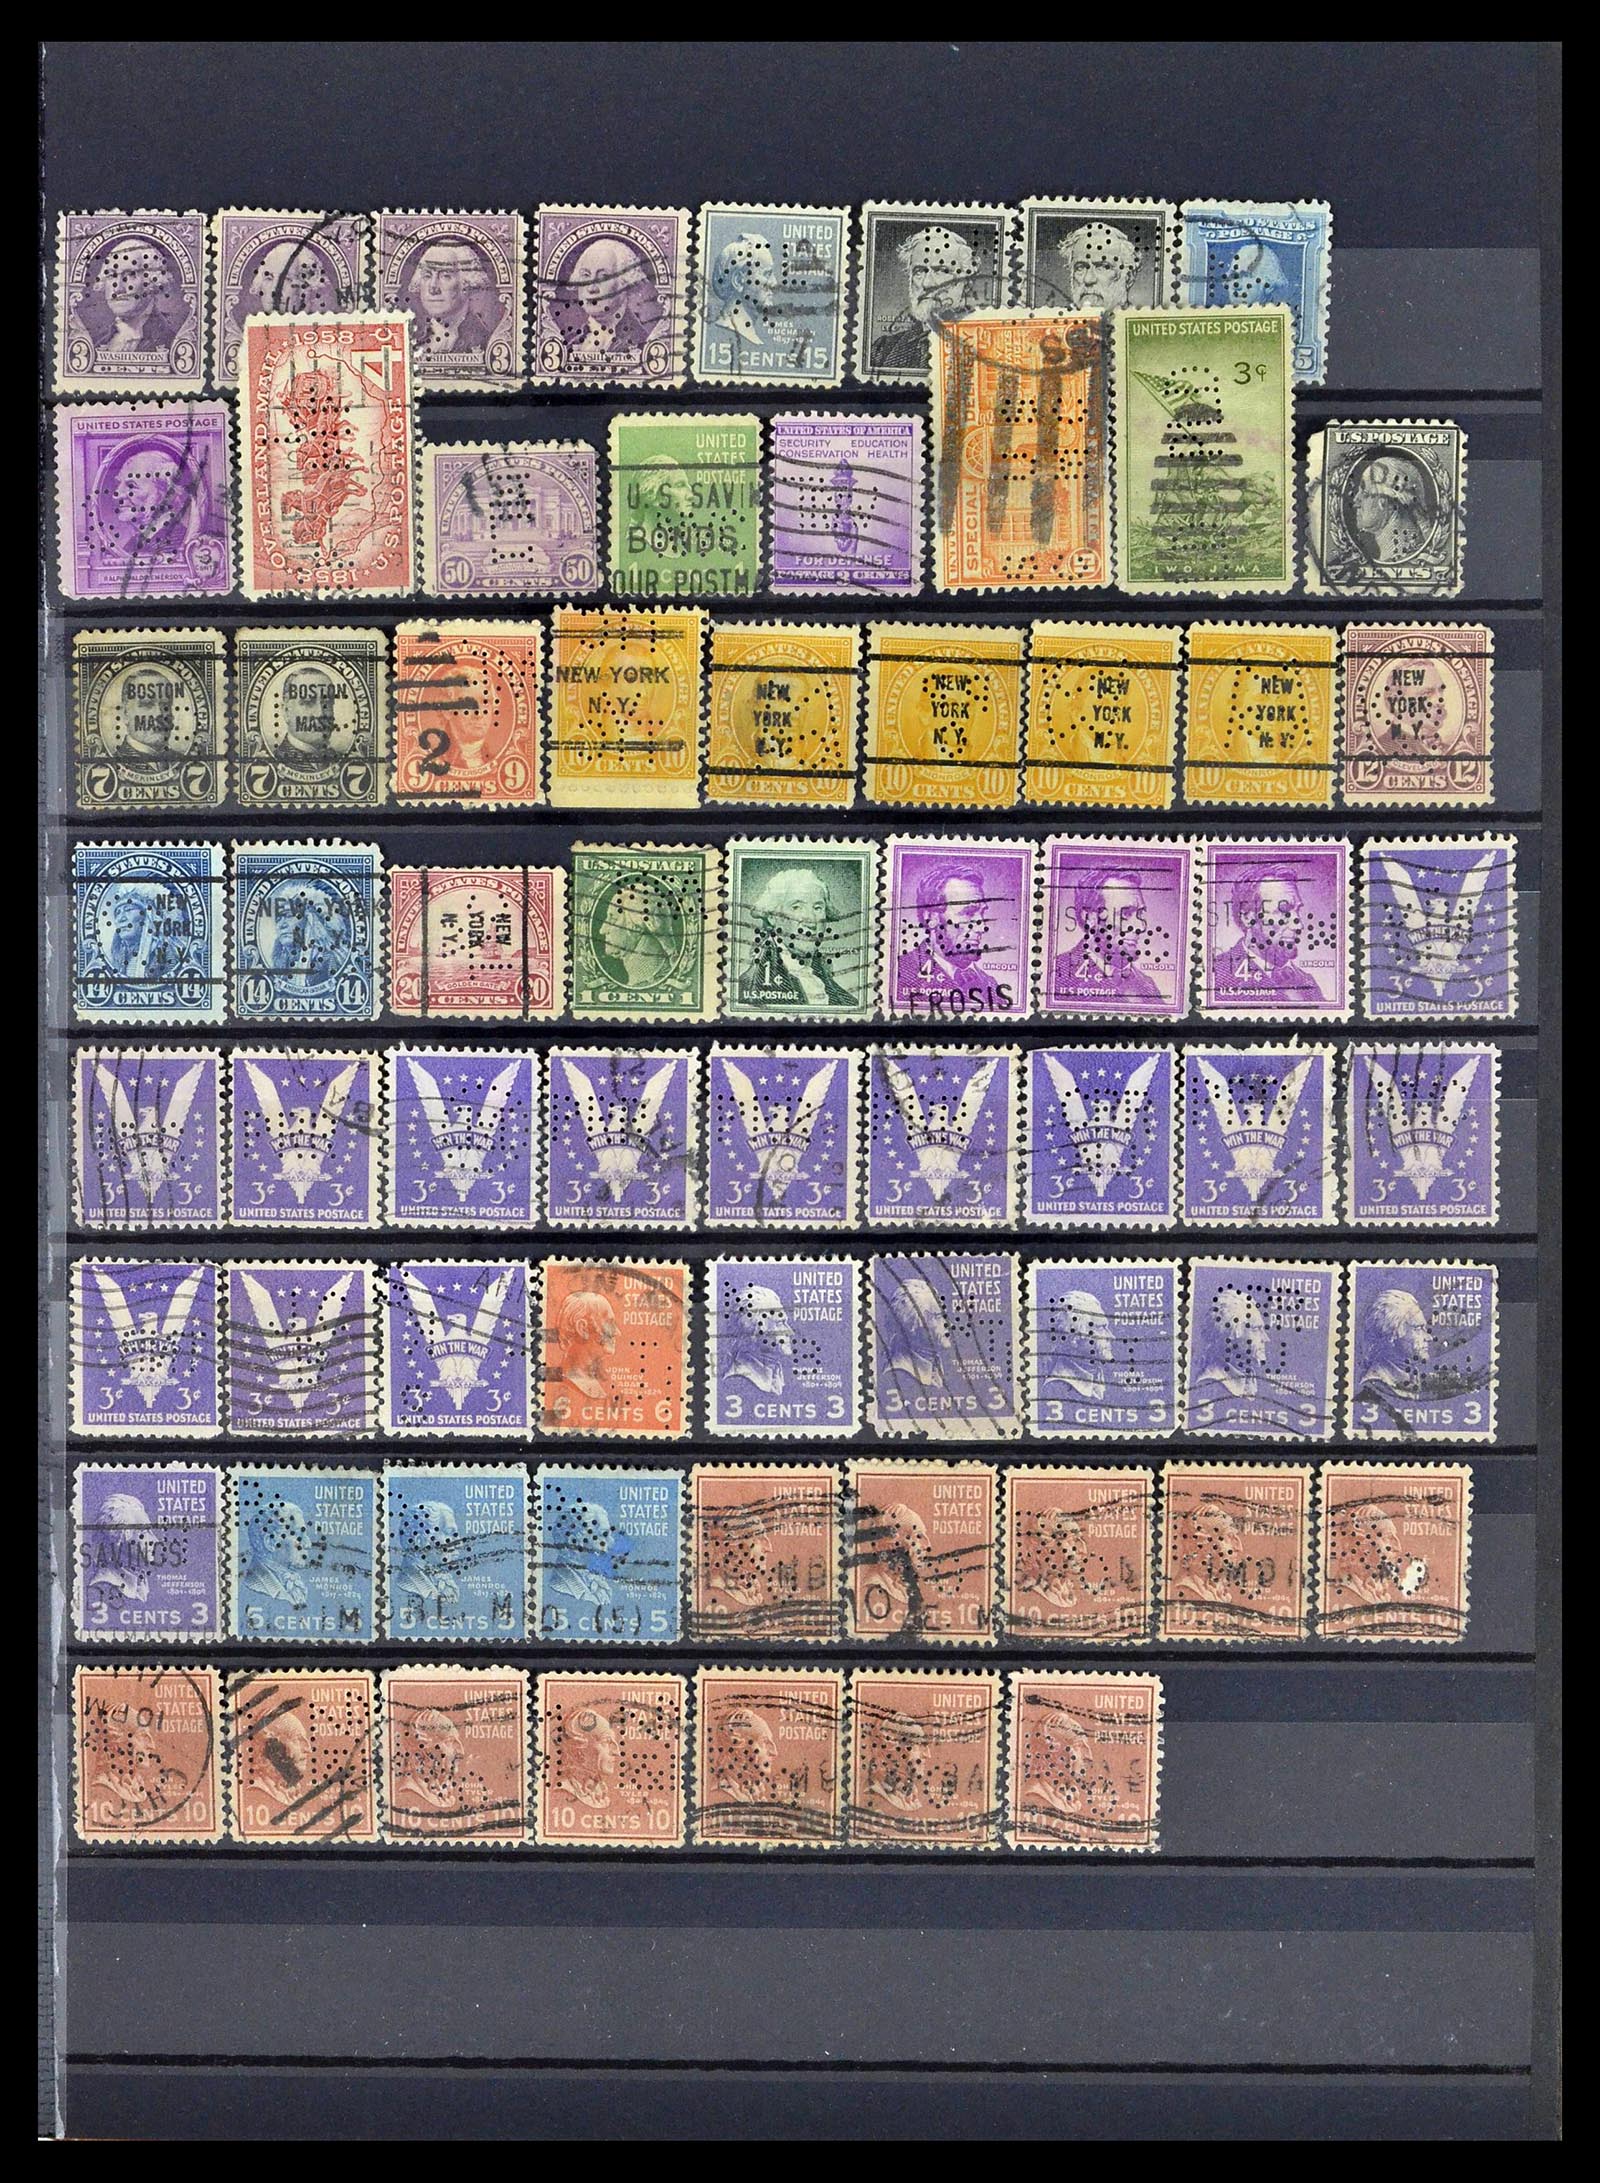 39196 0124 - Stamp collection 39196 Great Britain 1844-1955.